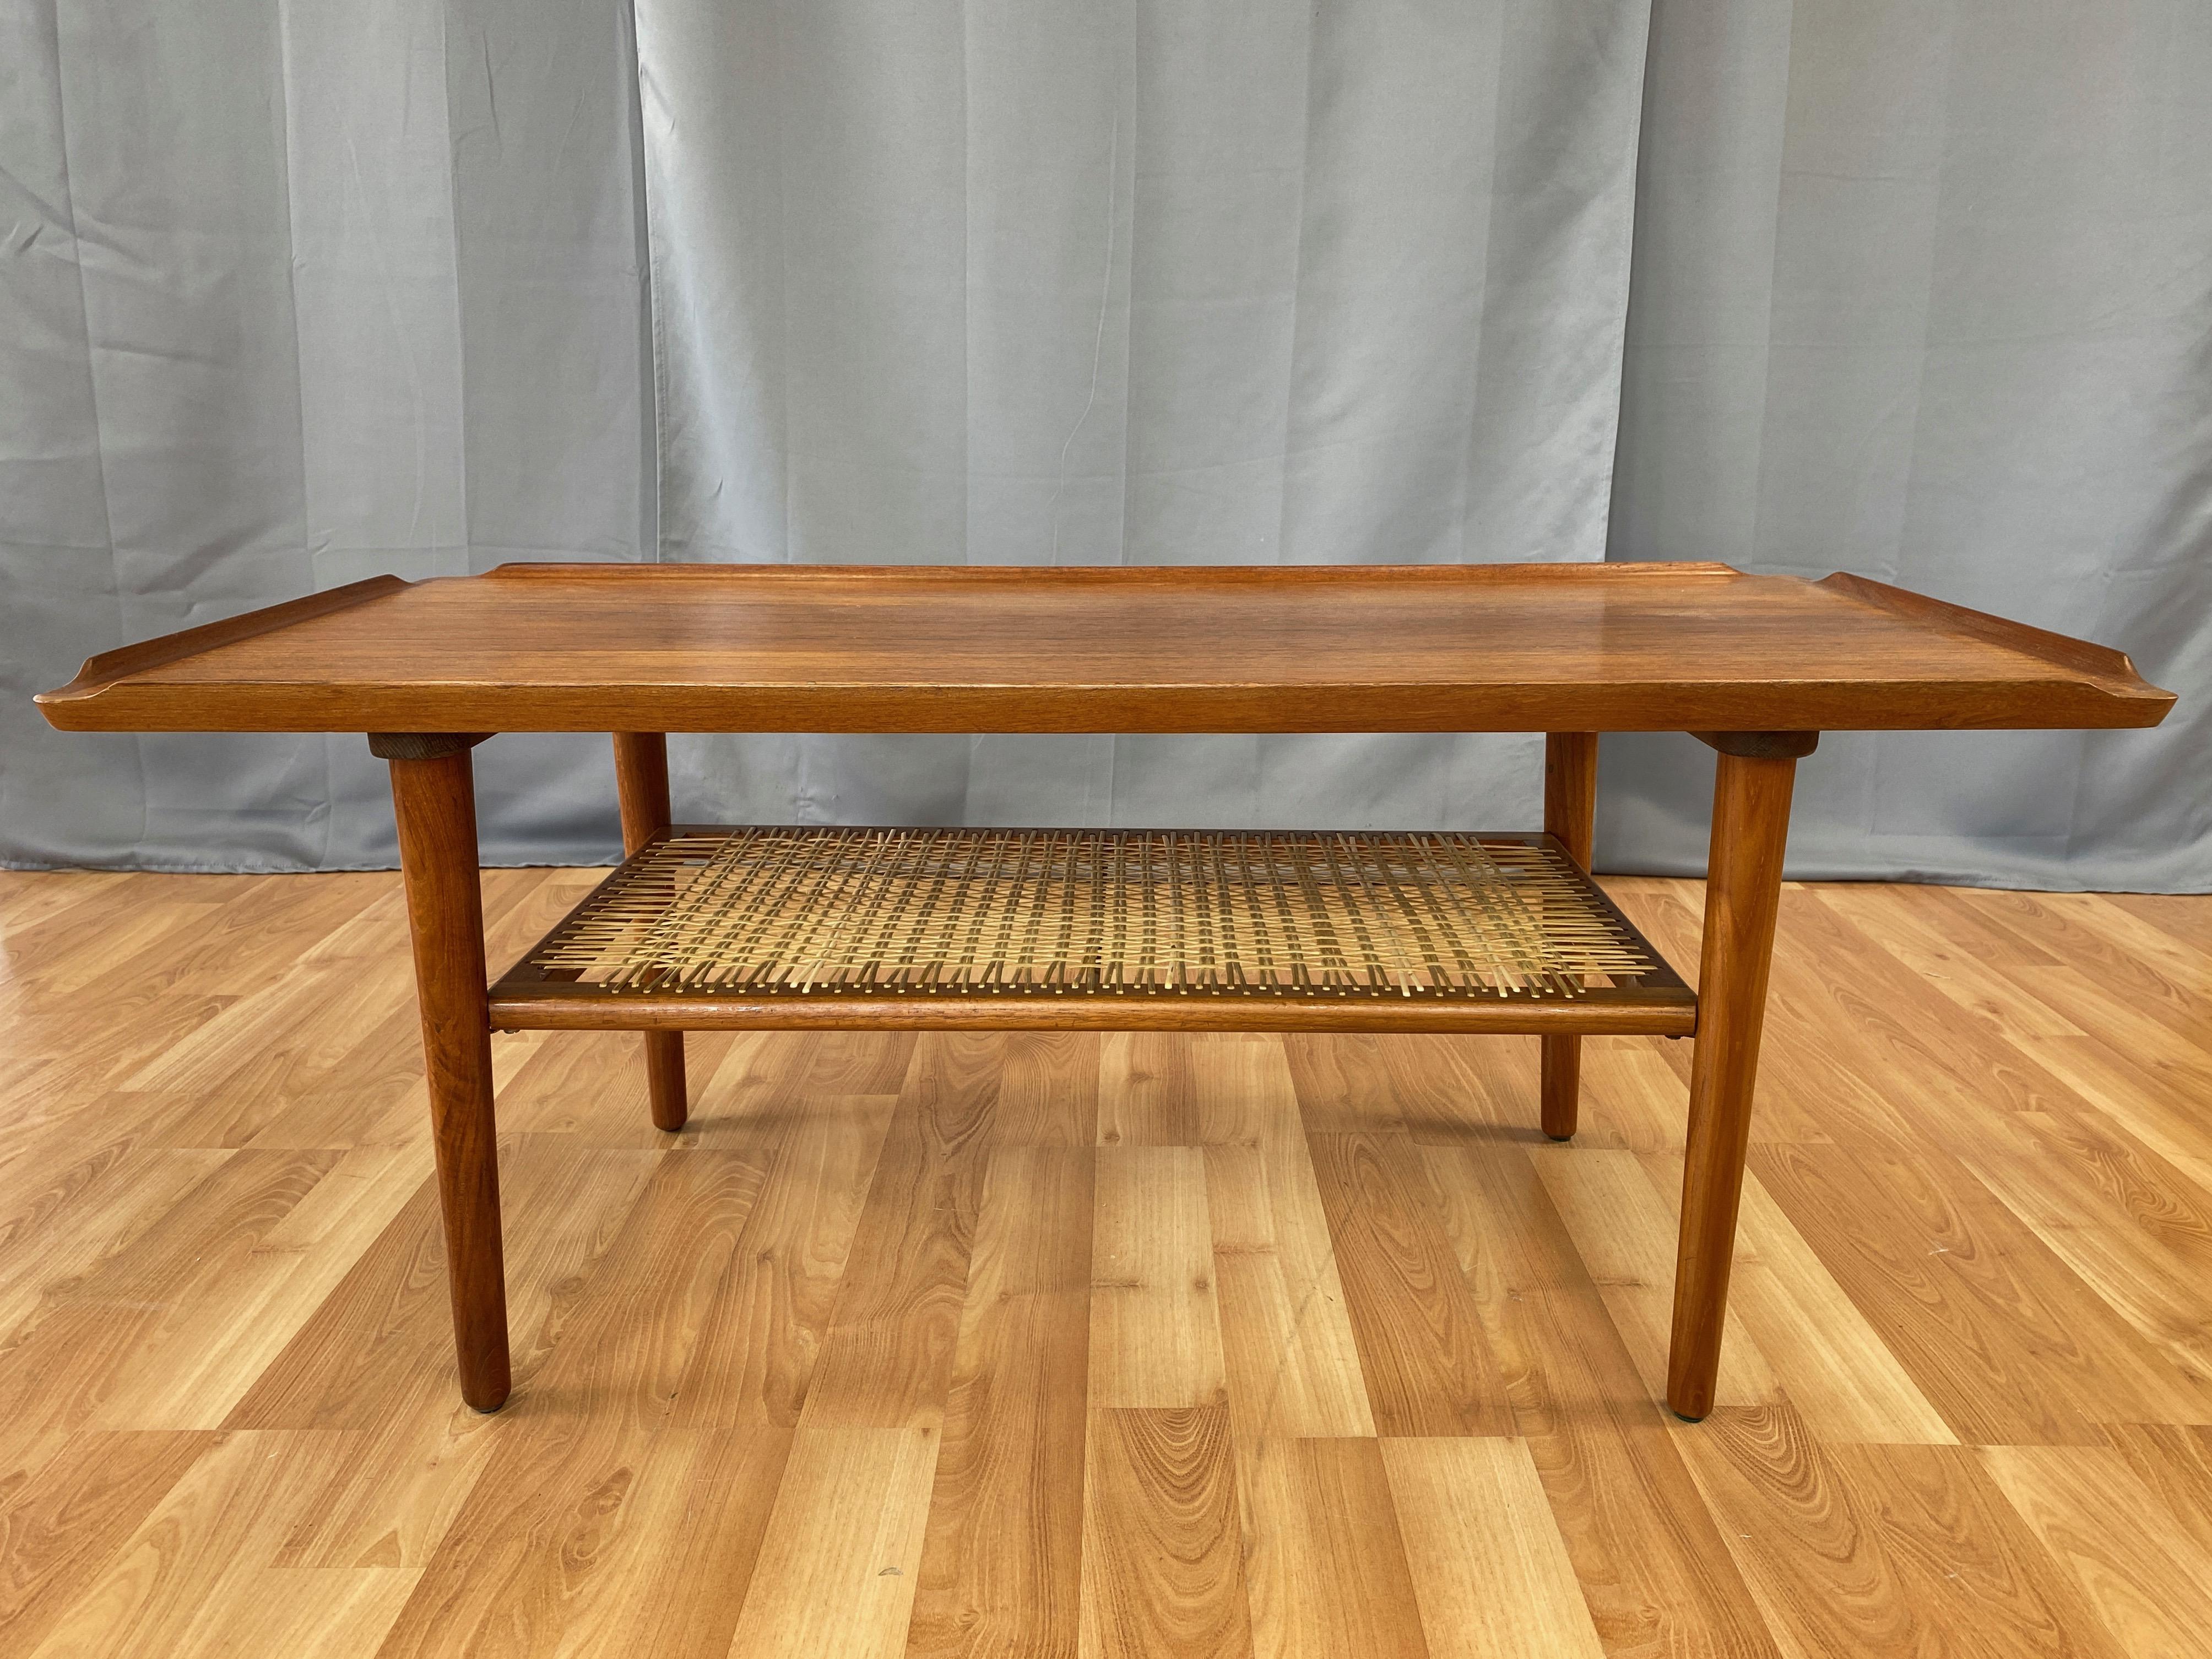 A very handsome Danish modern two-tier teak and rattan cocktail table or tall coffee table by Poul Jensen for Selig.

Top of bookmatched teak with sculptural raised lips on all four sides. Below is a shelf of open-weave rattan in a teak frame.